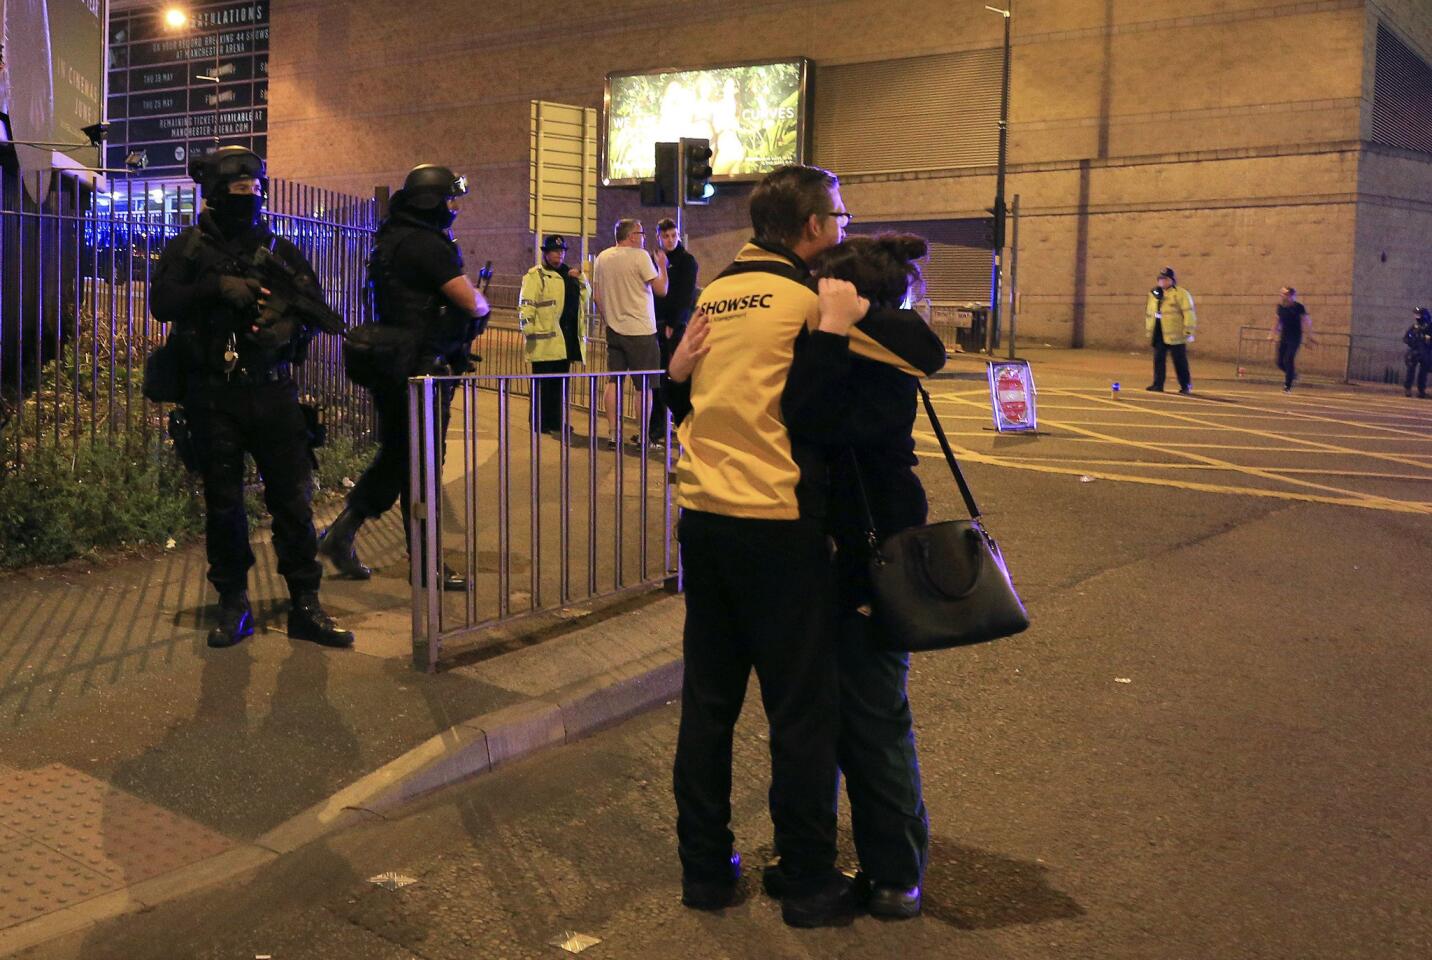 Police stand guard at Manchester Arena after reports of an explosion at the venue during an Ariana Grande gig in Manchester, England, on May 22, 2017.